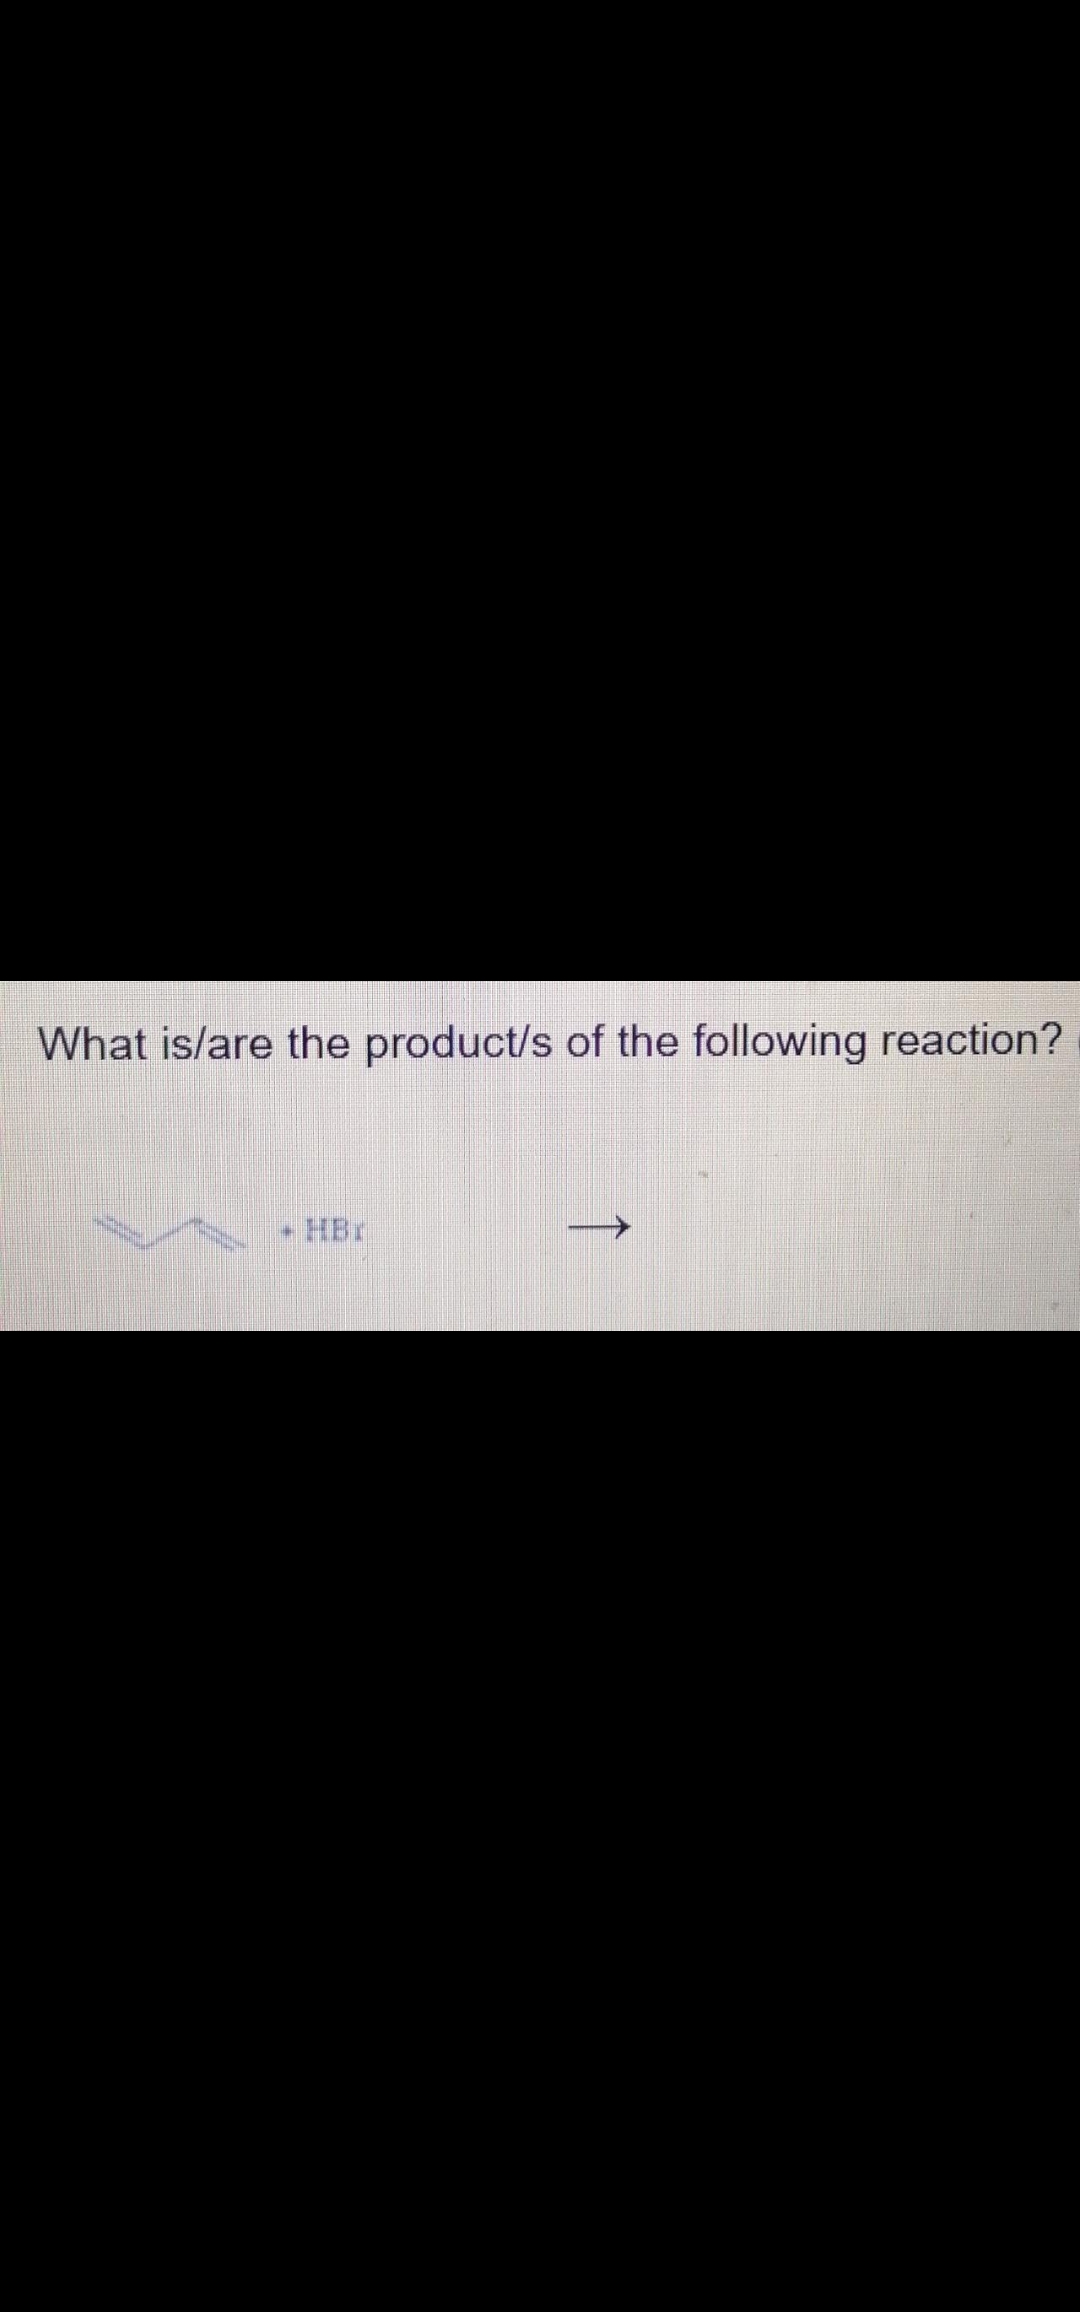 What is/are the product/s of the following reaction?
HBr
